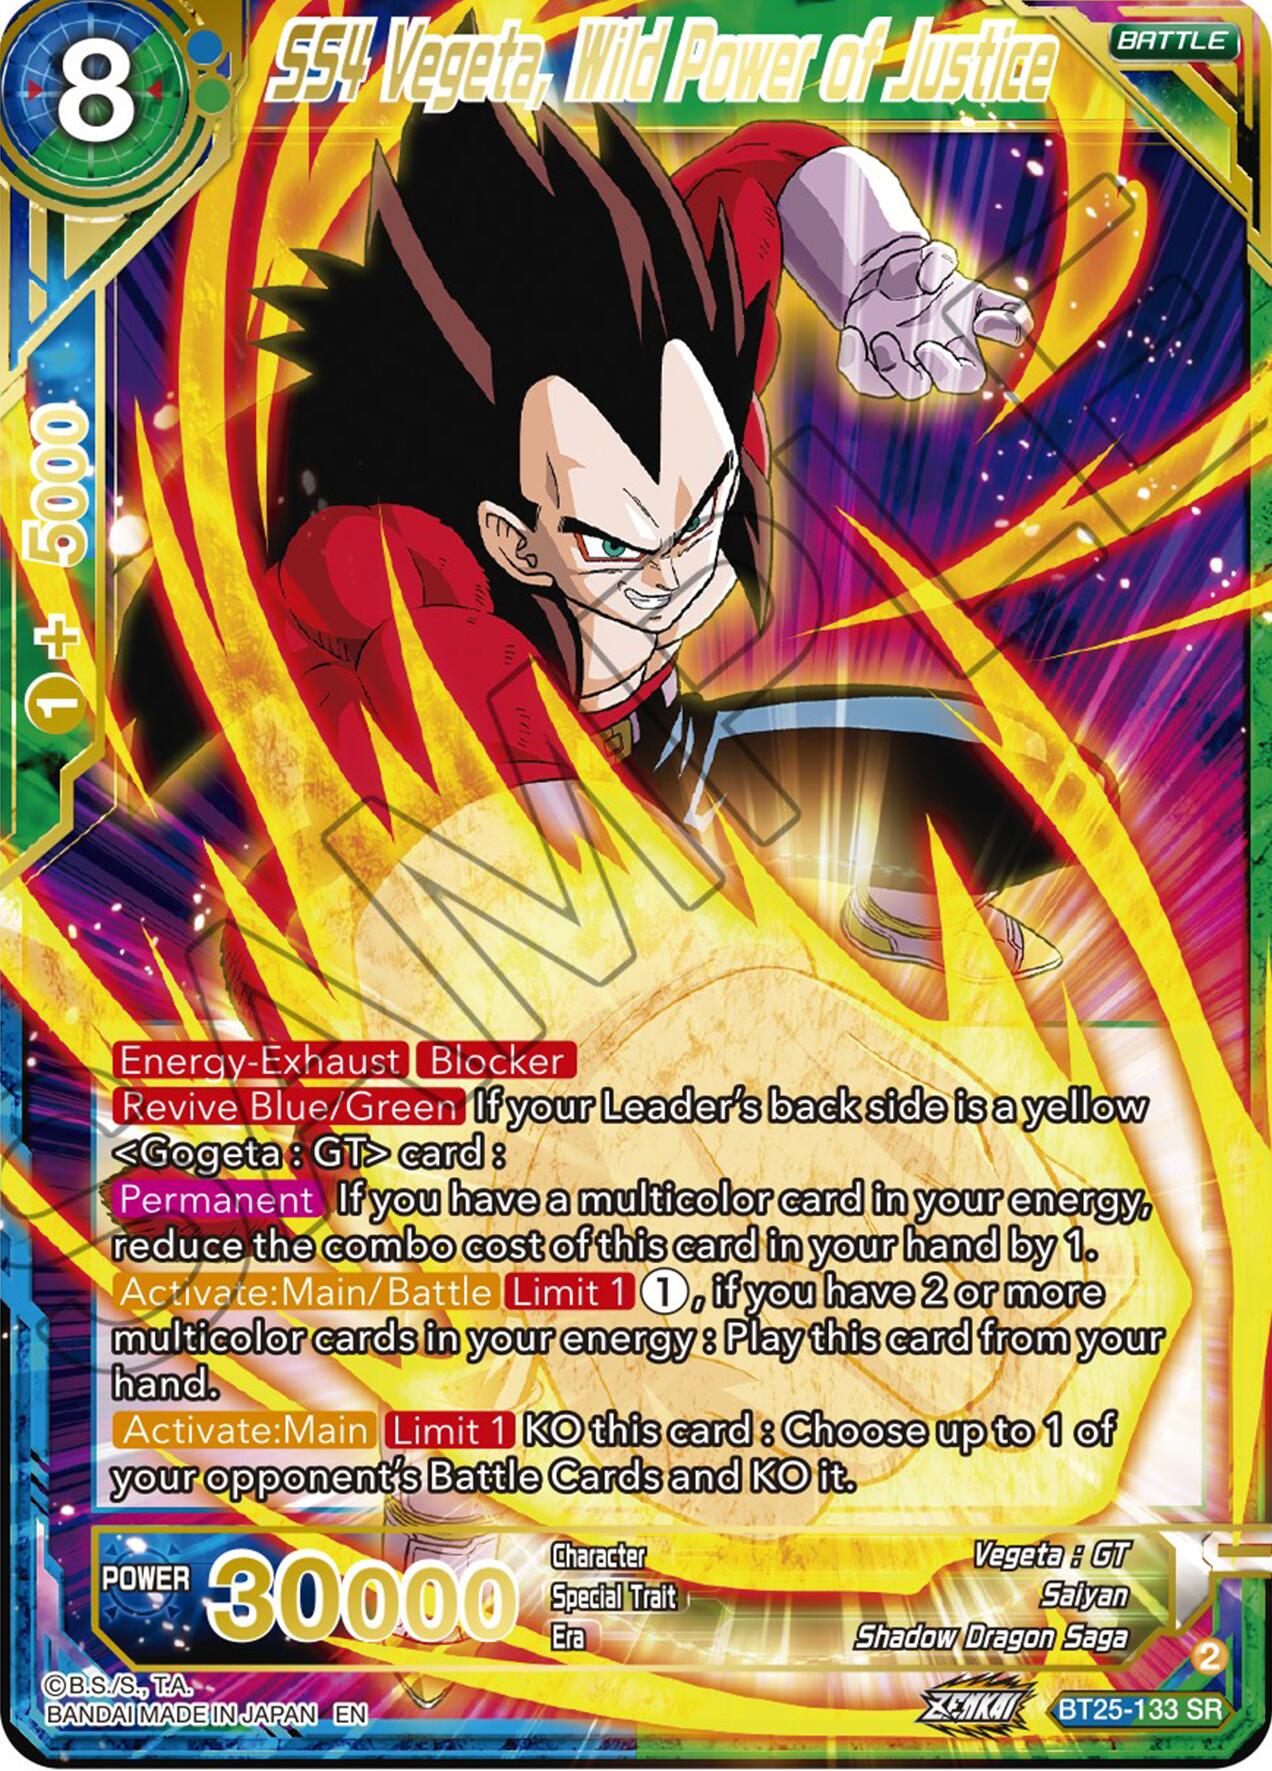 SS4 Vegeta, Wild Power of Justice (BT25-133) [Legend of the Dragon Balls] | Sanctuary Gaming